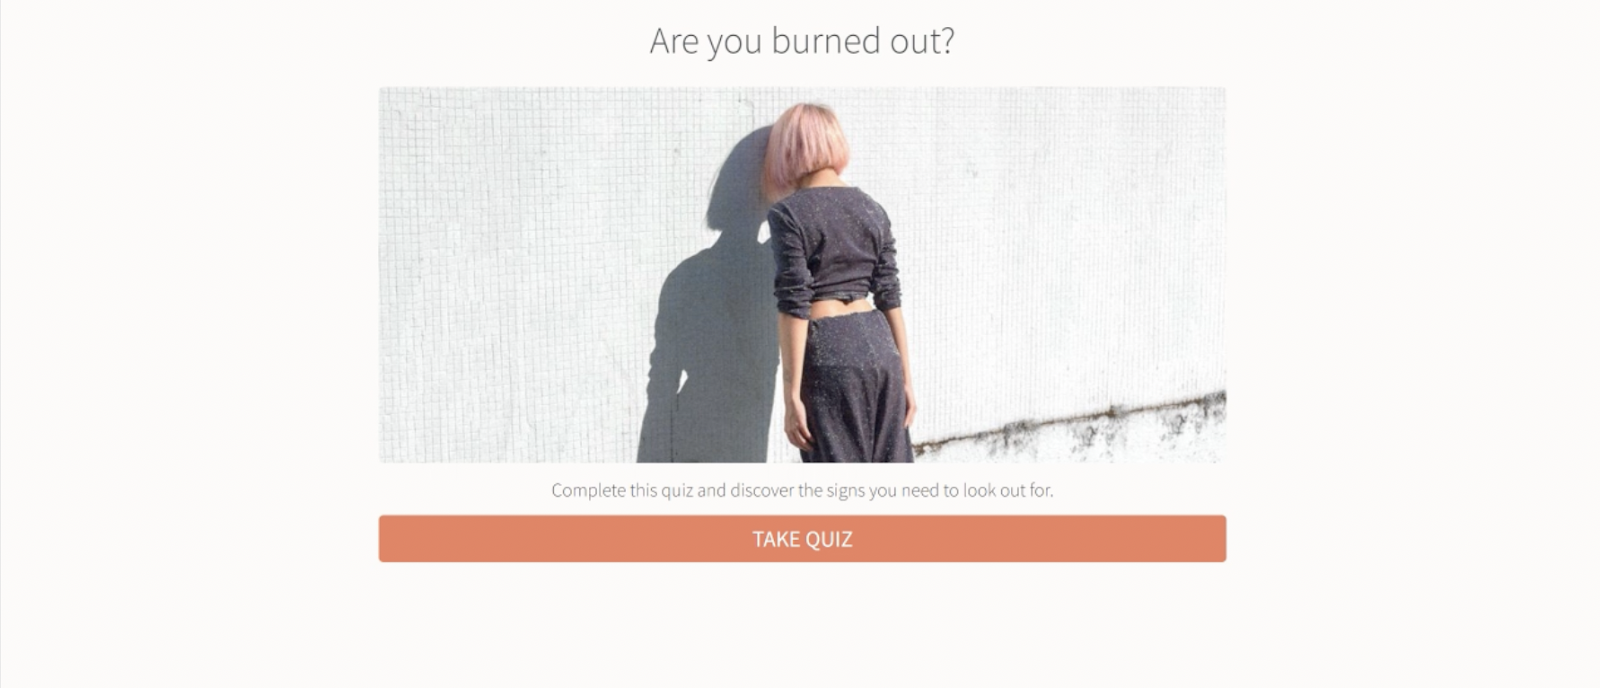 screenshot of quiz cover page for "Are you burned out?" quiz